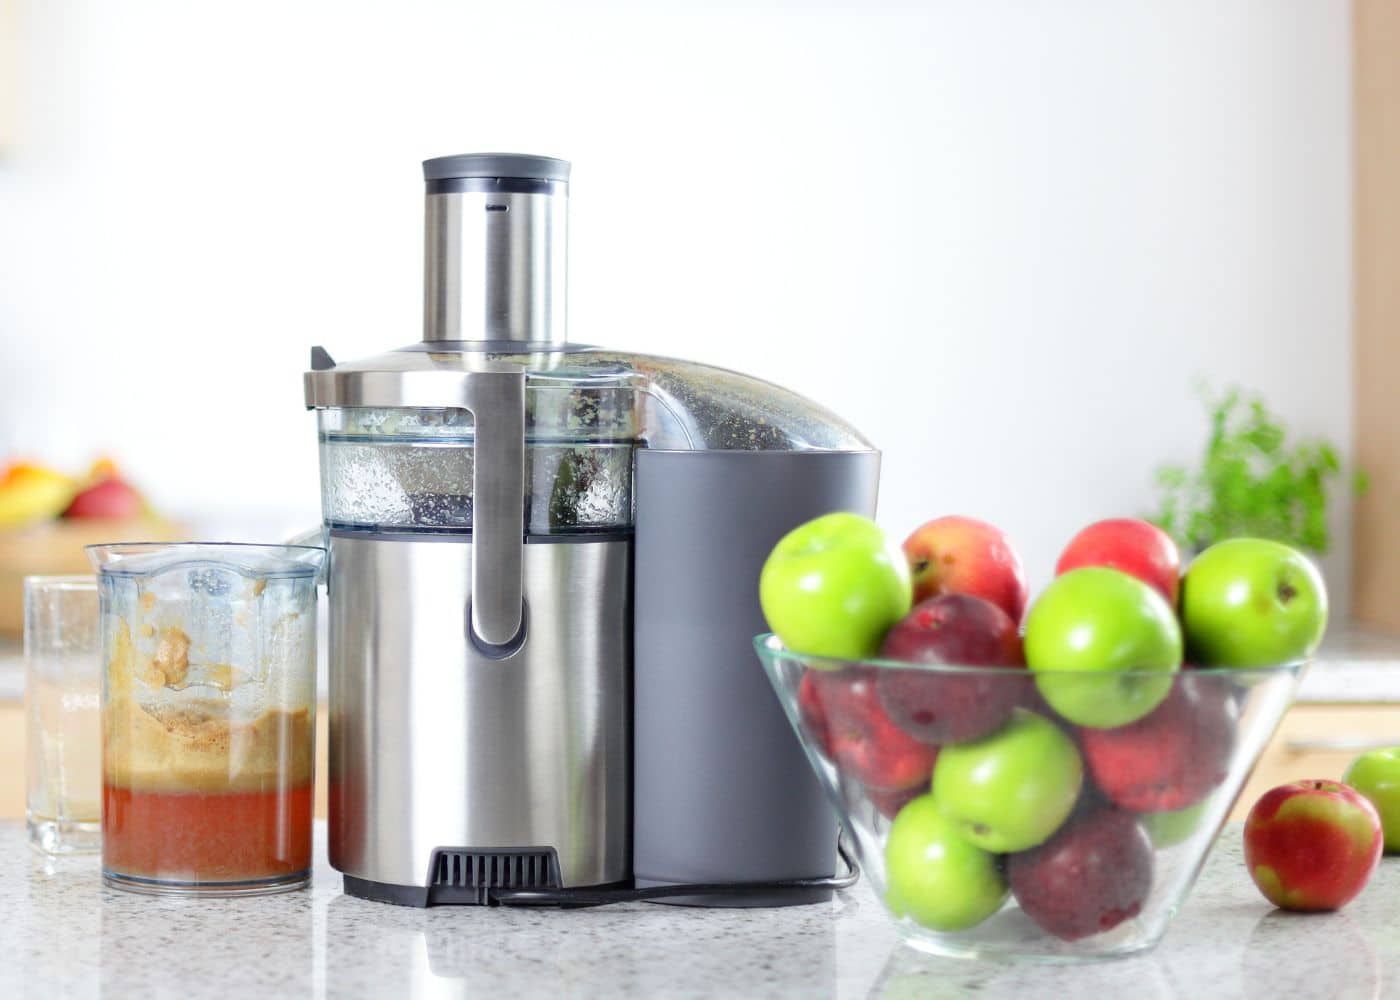 https://www.cleaneatingkitchen.com/wp-content/uploads/2022/11/juicer-with-bowl-of-apples-hero.jpg